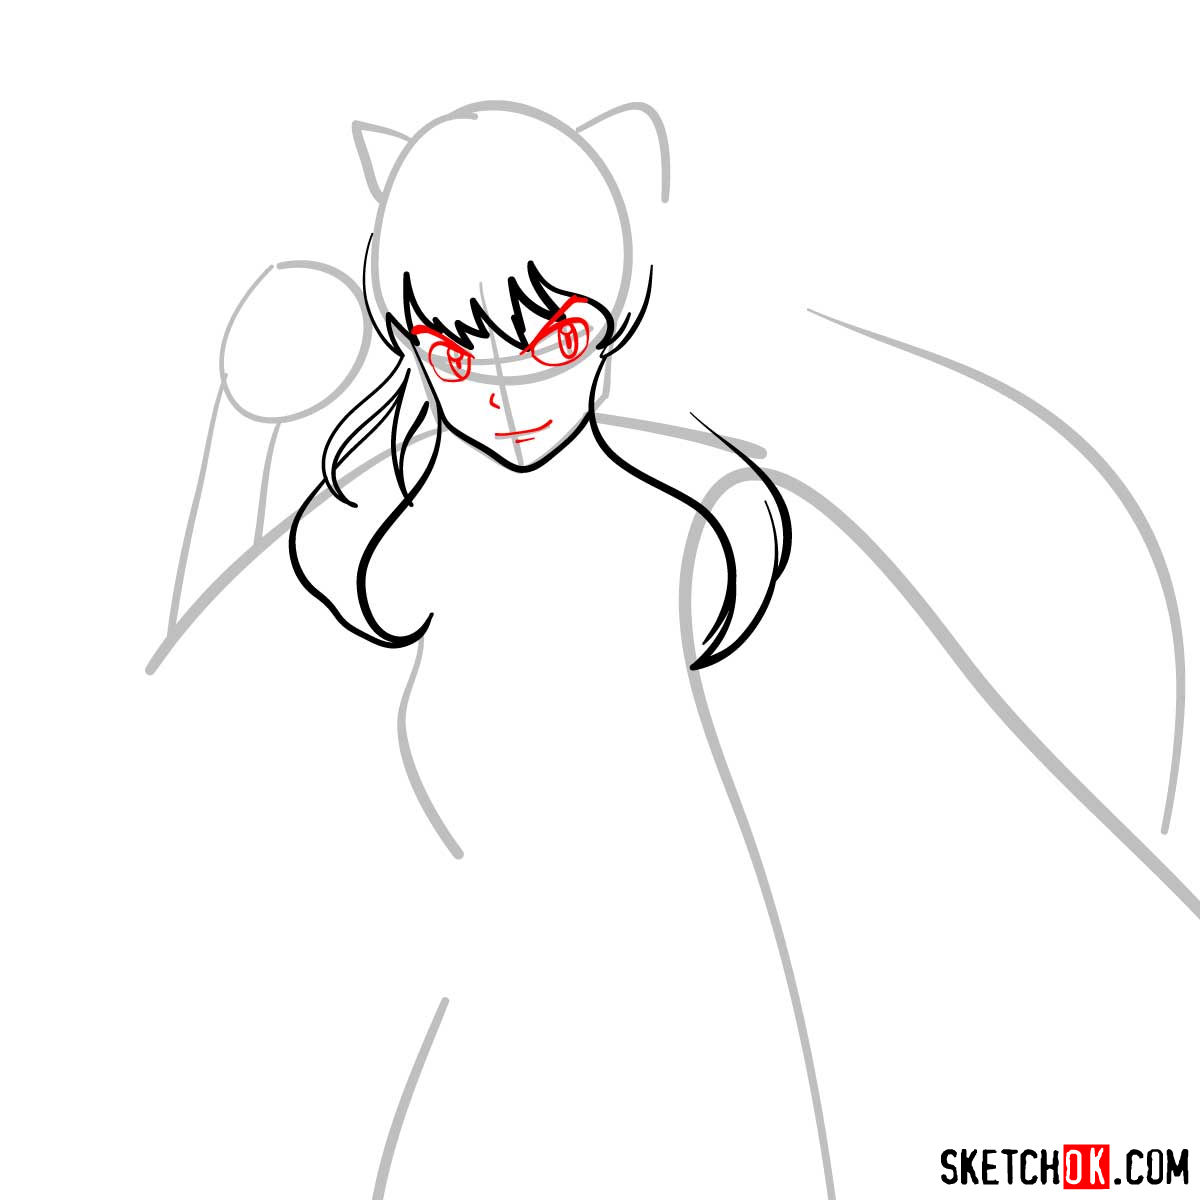 How to draw Inuyasha - 12 steps tutorial - step 05